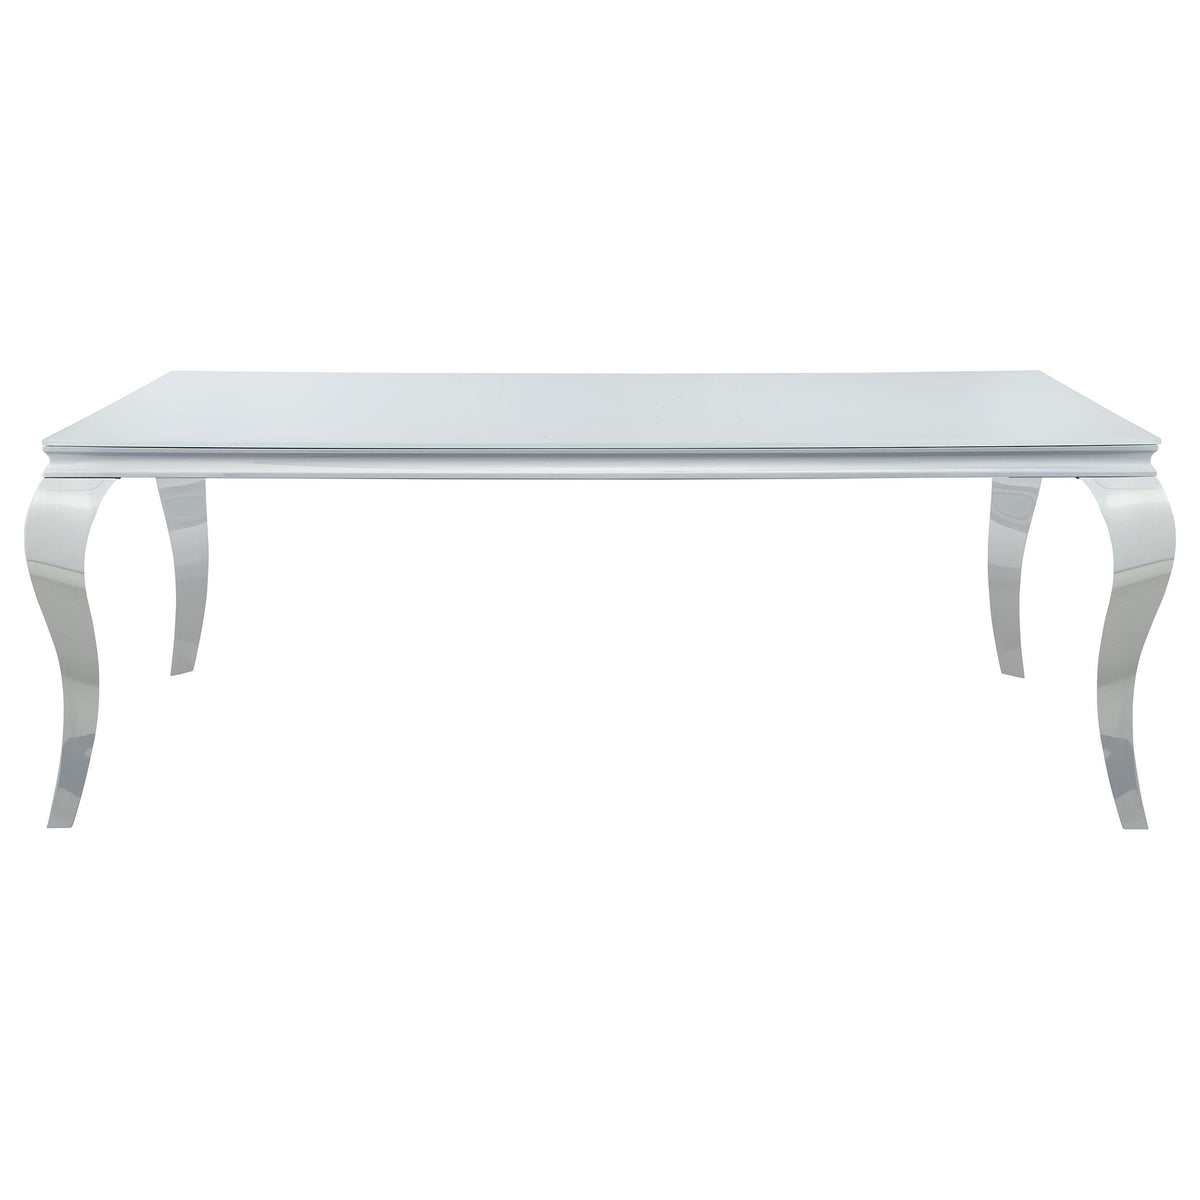 Carone Rectangular Glass Top Dining Table White and Chrome  Half Price Furniture